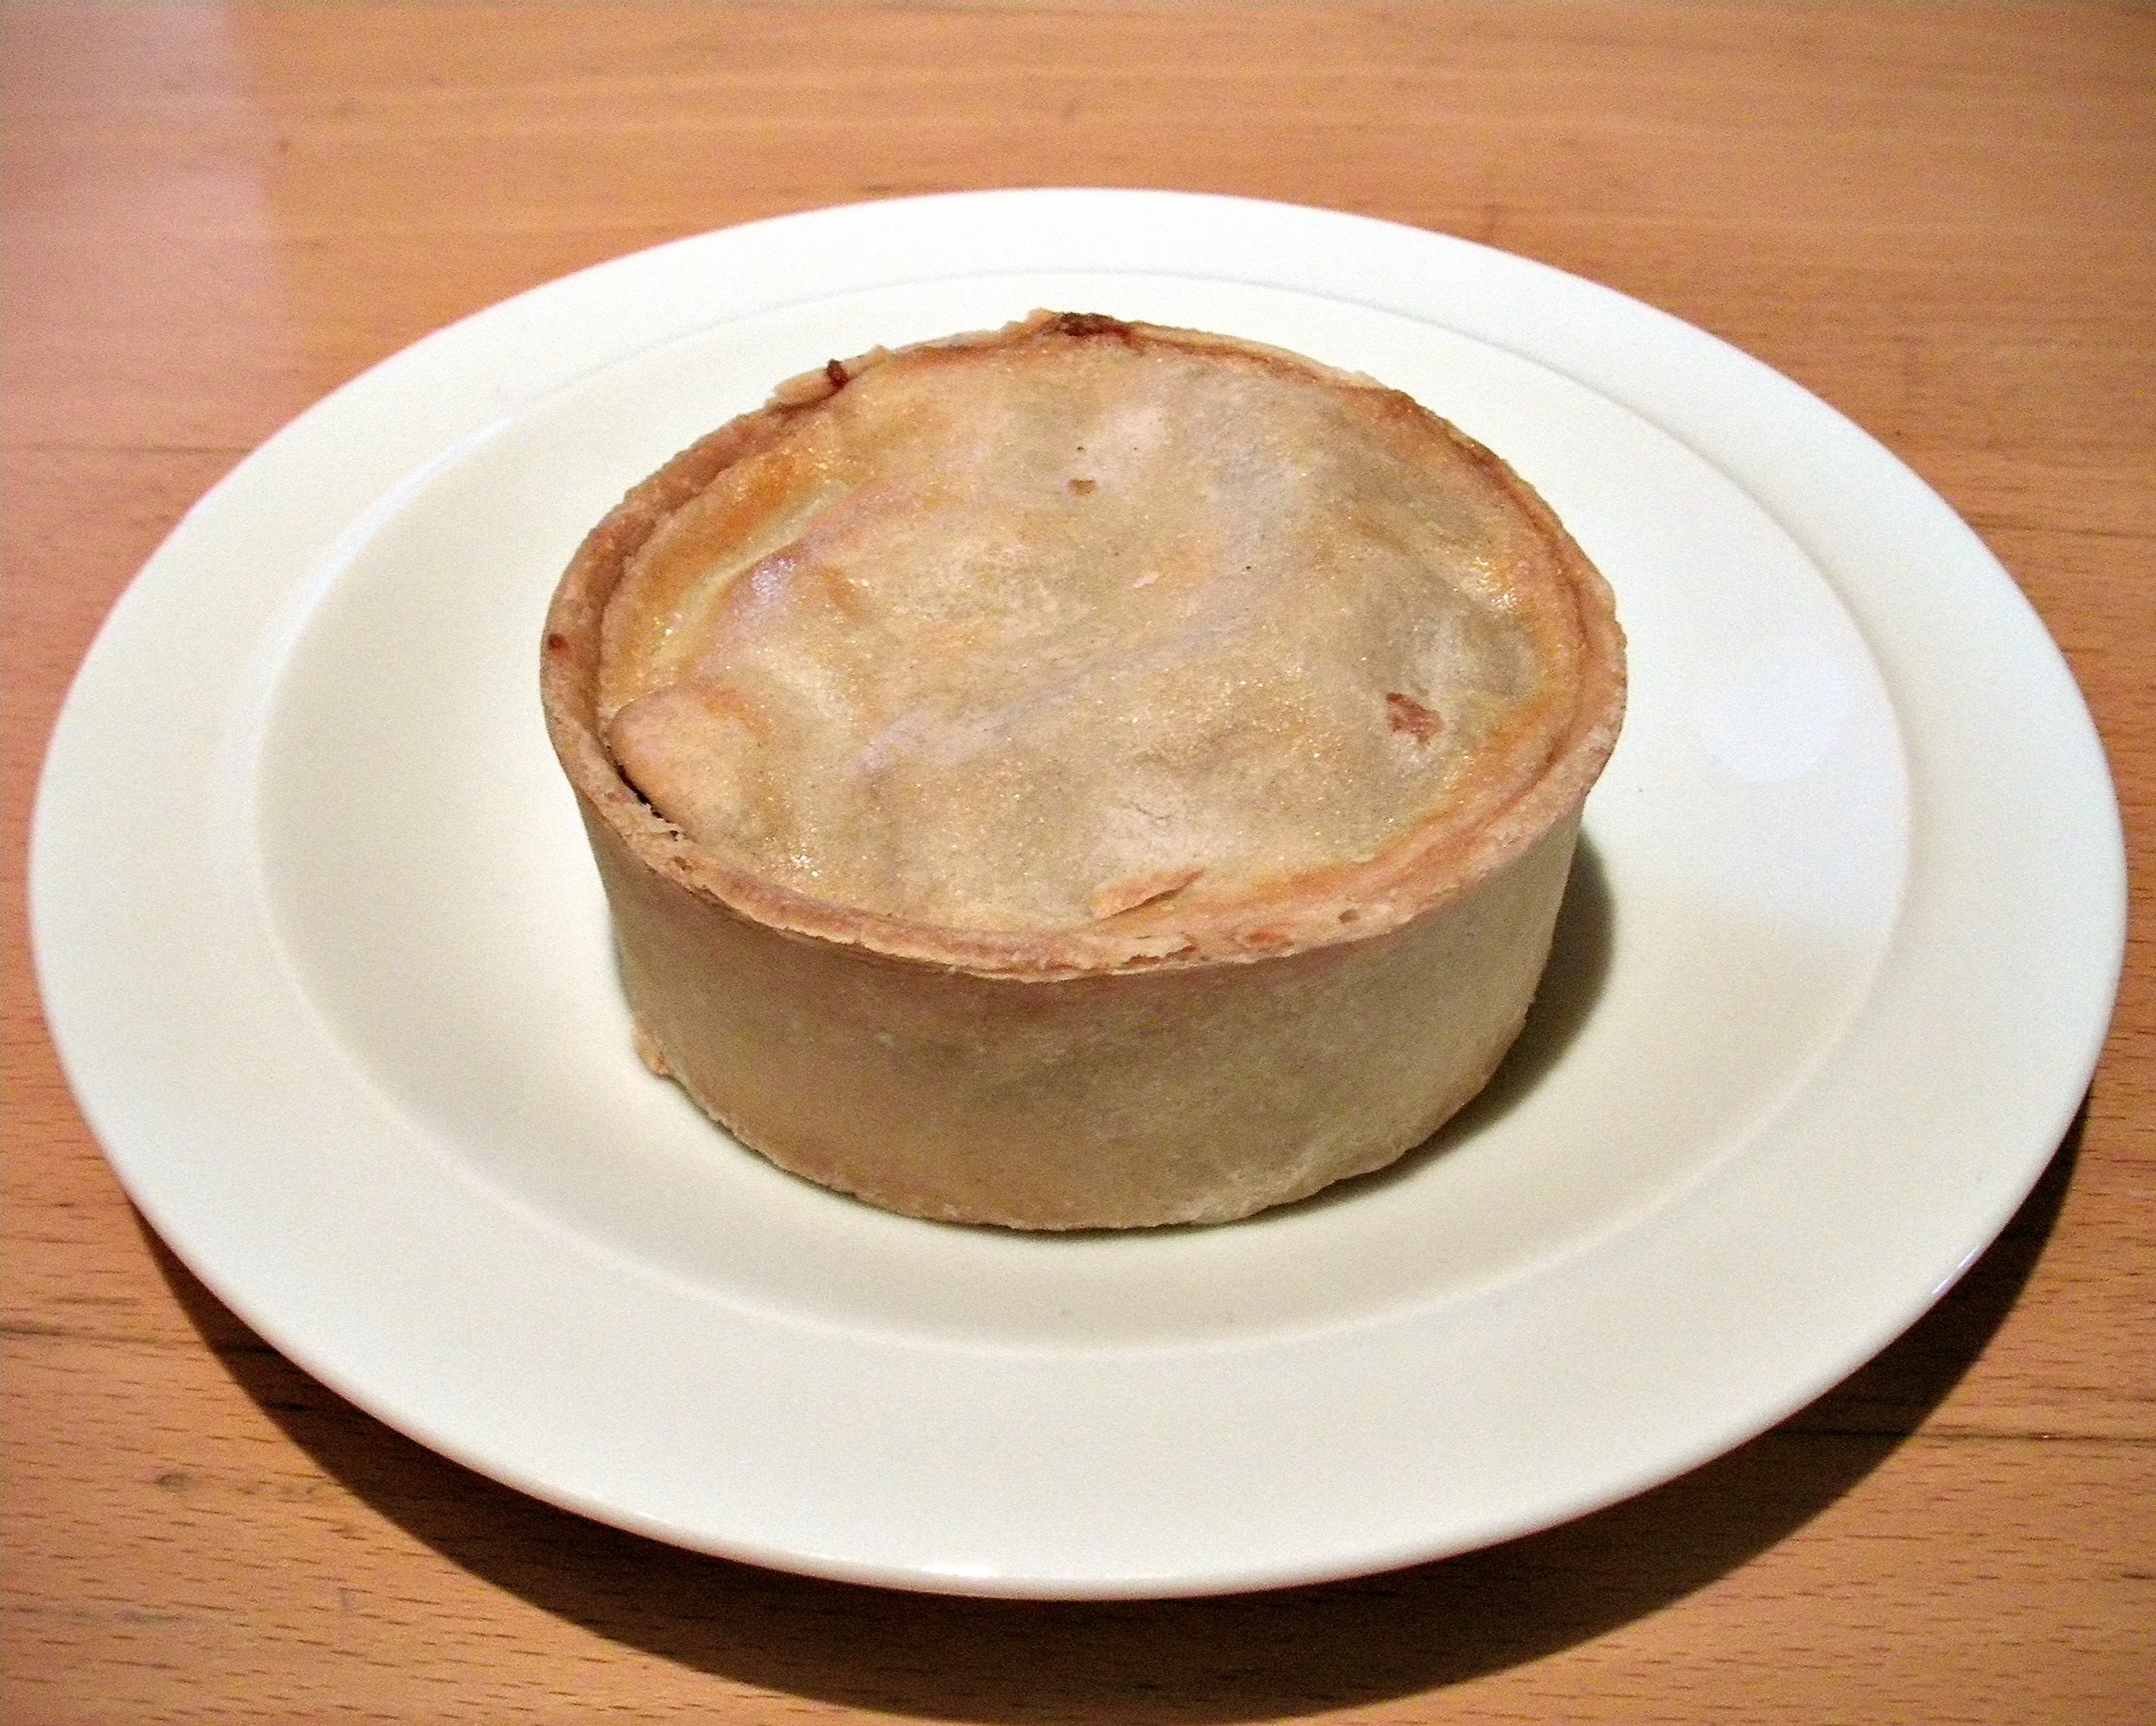 Pictures of pies